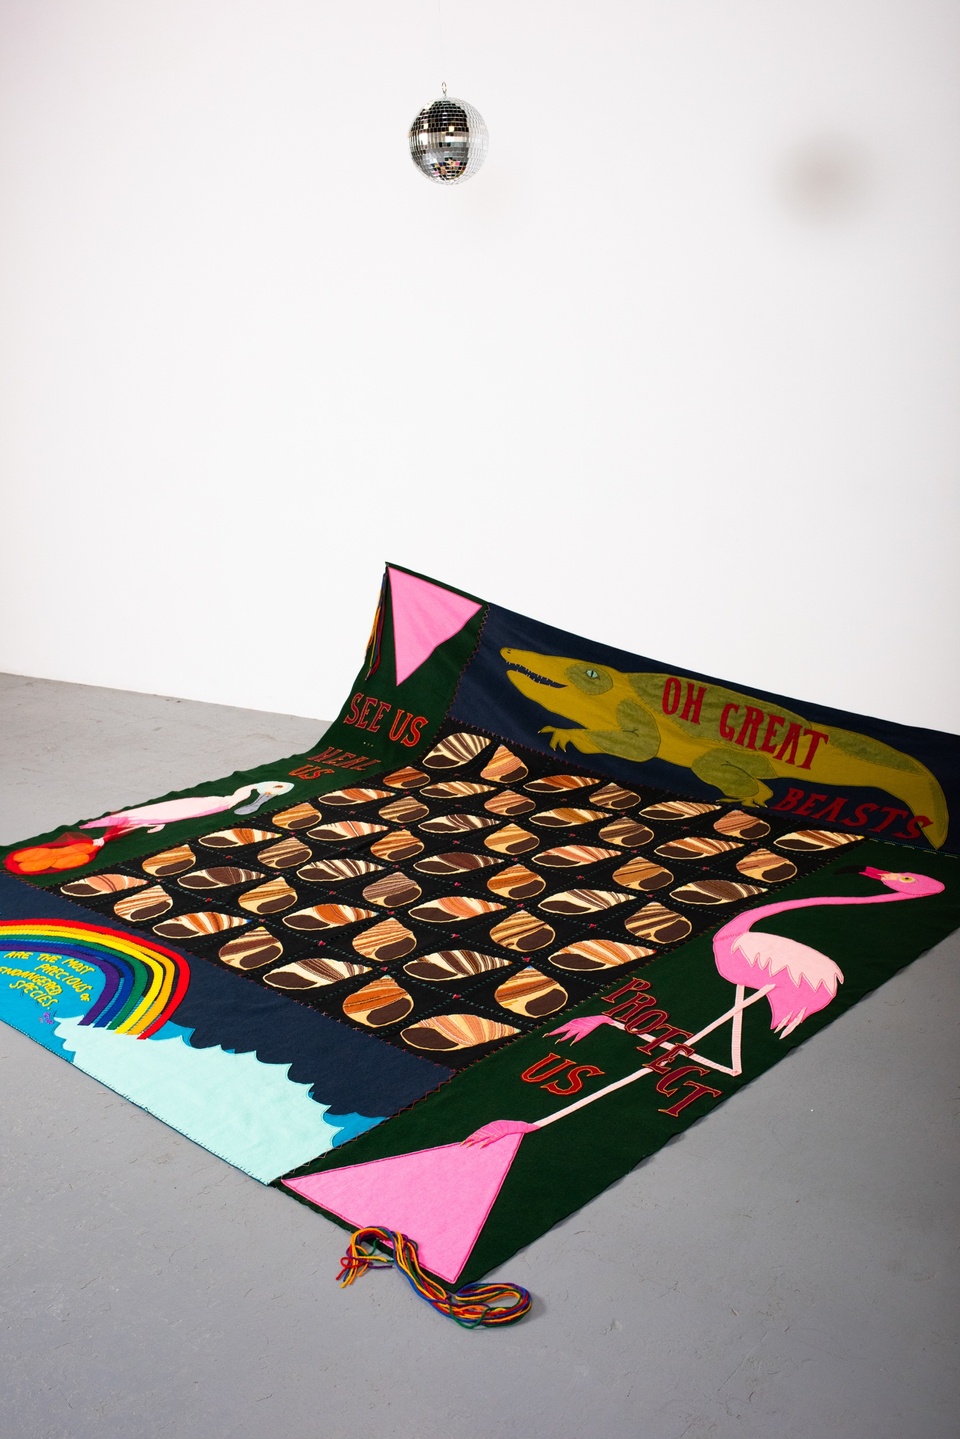 A colorful quilt is slumped up against the white wall of a gallery space. The quilt is decorated with an alligator, a flamingo, a pelican, water, a bag of oranges, two large pink triangles, a rainbow, and a grid of spiral seashells. Letters on the quilt read "Oh great beasts, see us, heal us, protect us." A miniature disco ball hangs above it.